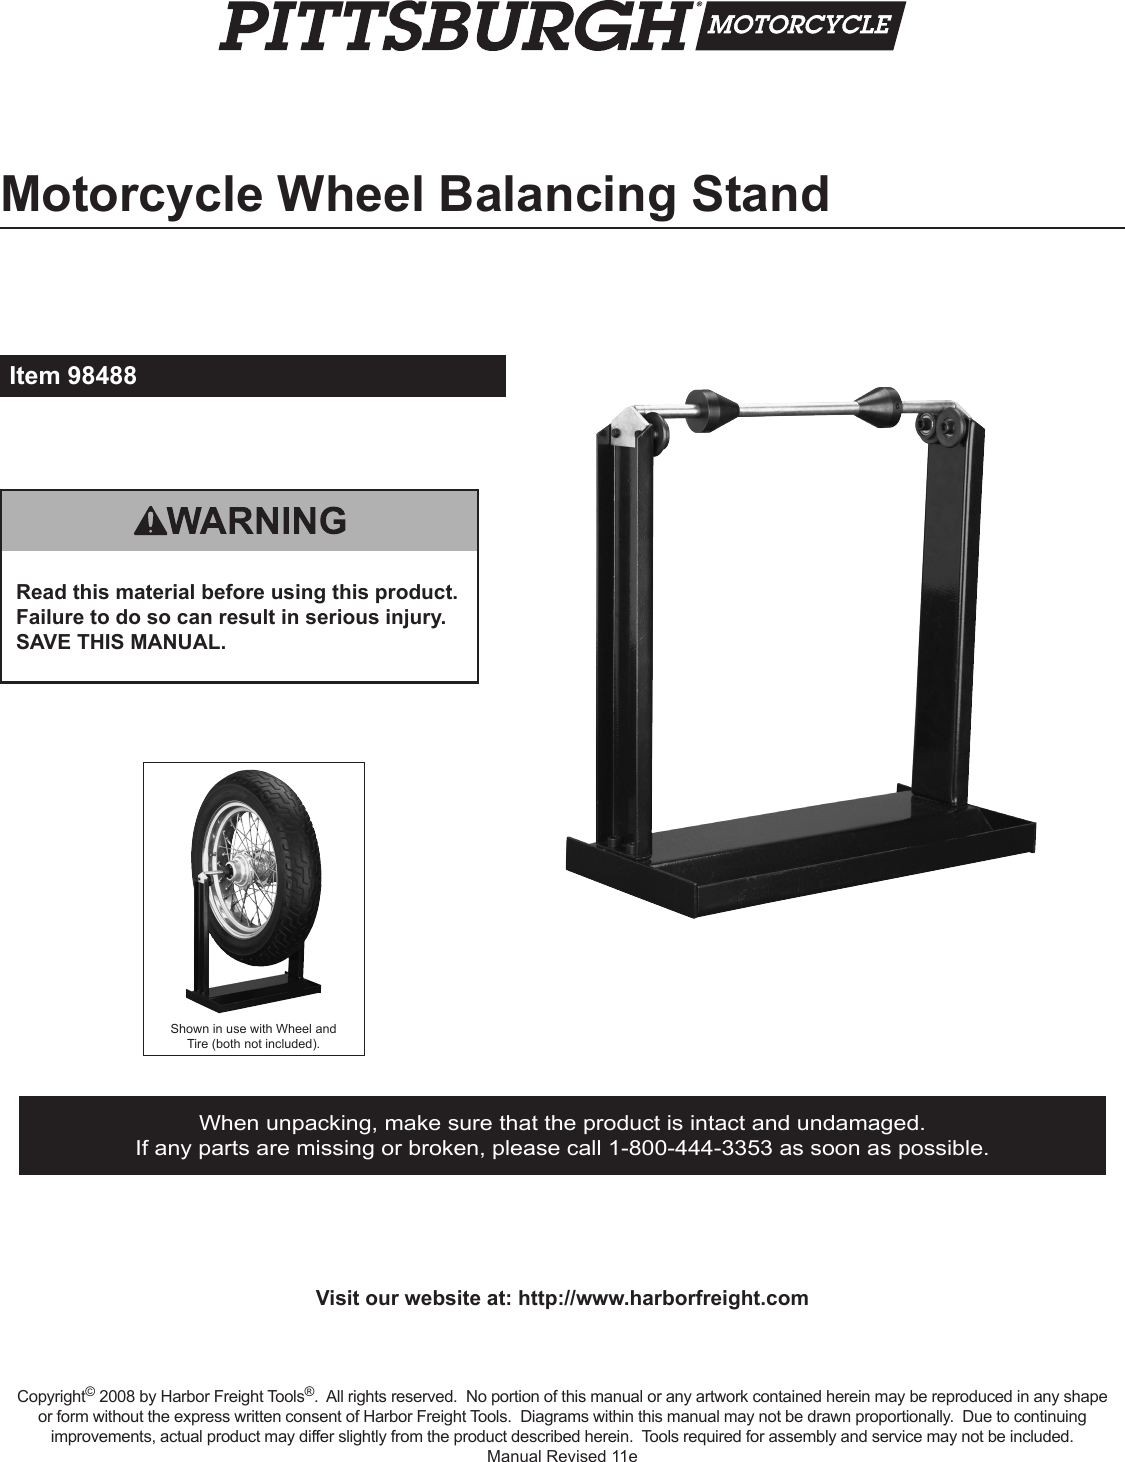 Page 1 of 4 - Harbor-Freight Harbor-Freight-Motorcycle-Wheel-Balancing-Stand-Product-Manual-  Harbor-freight-motorcycle-wheel-balancing-stand-product-manual